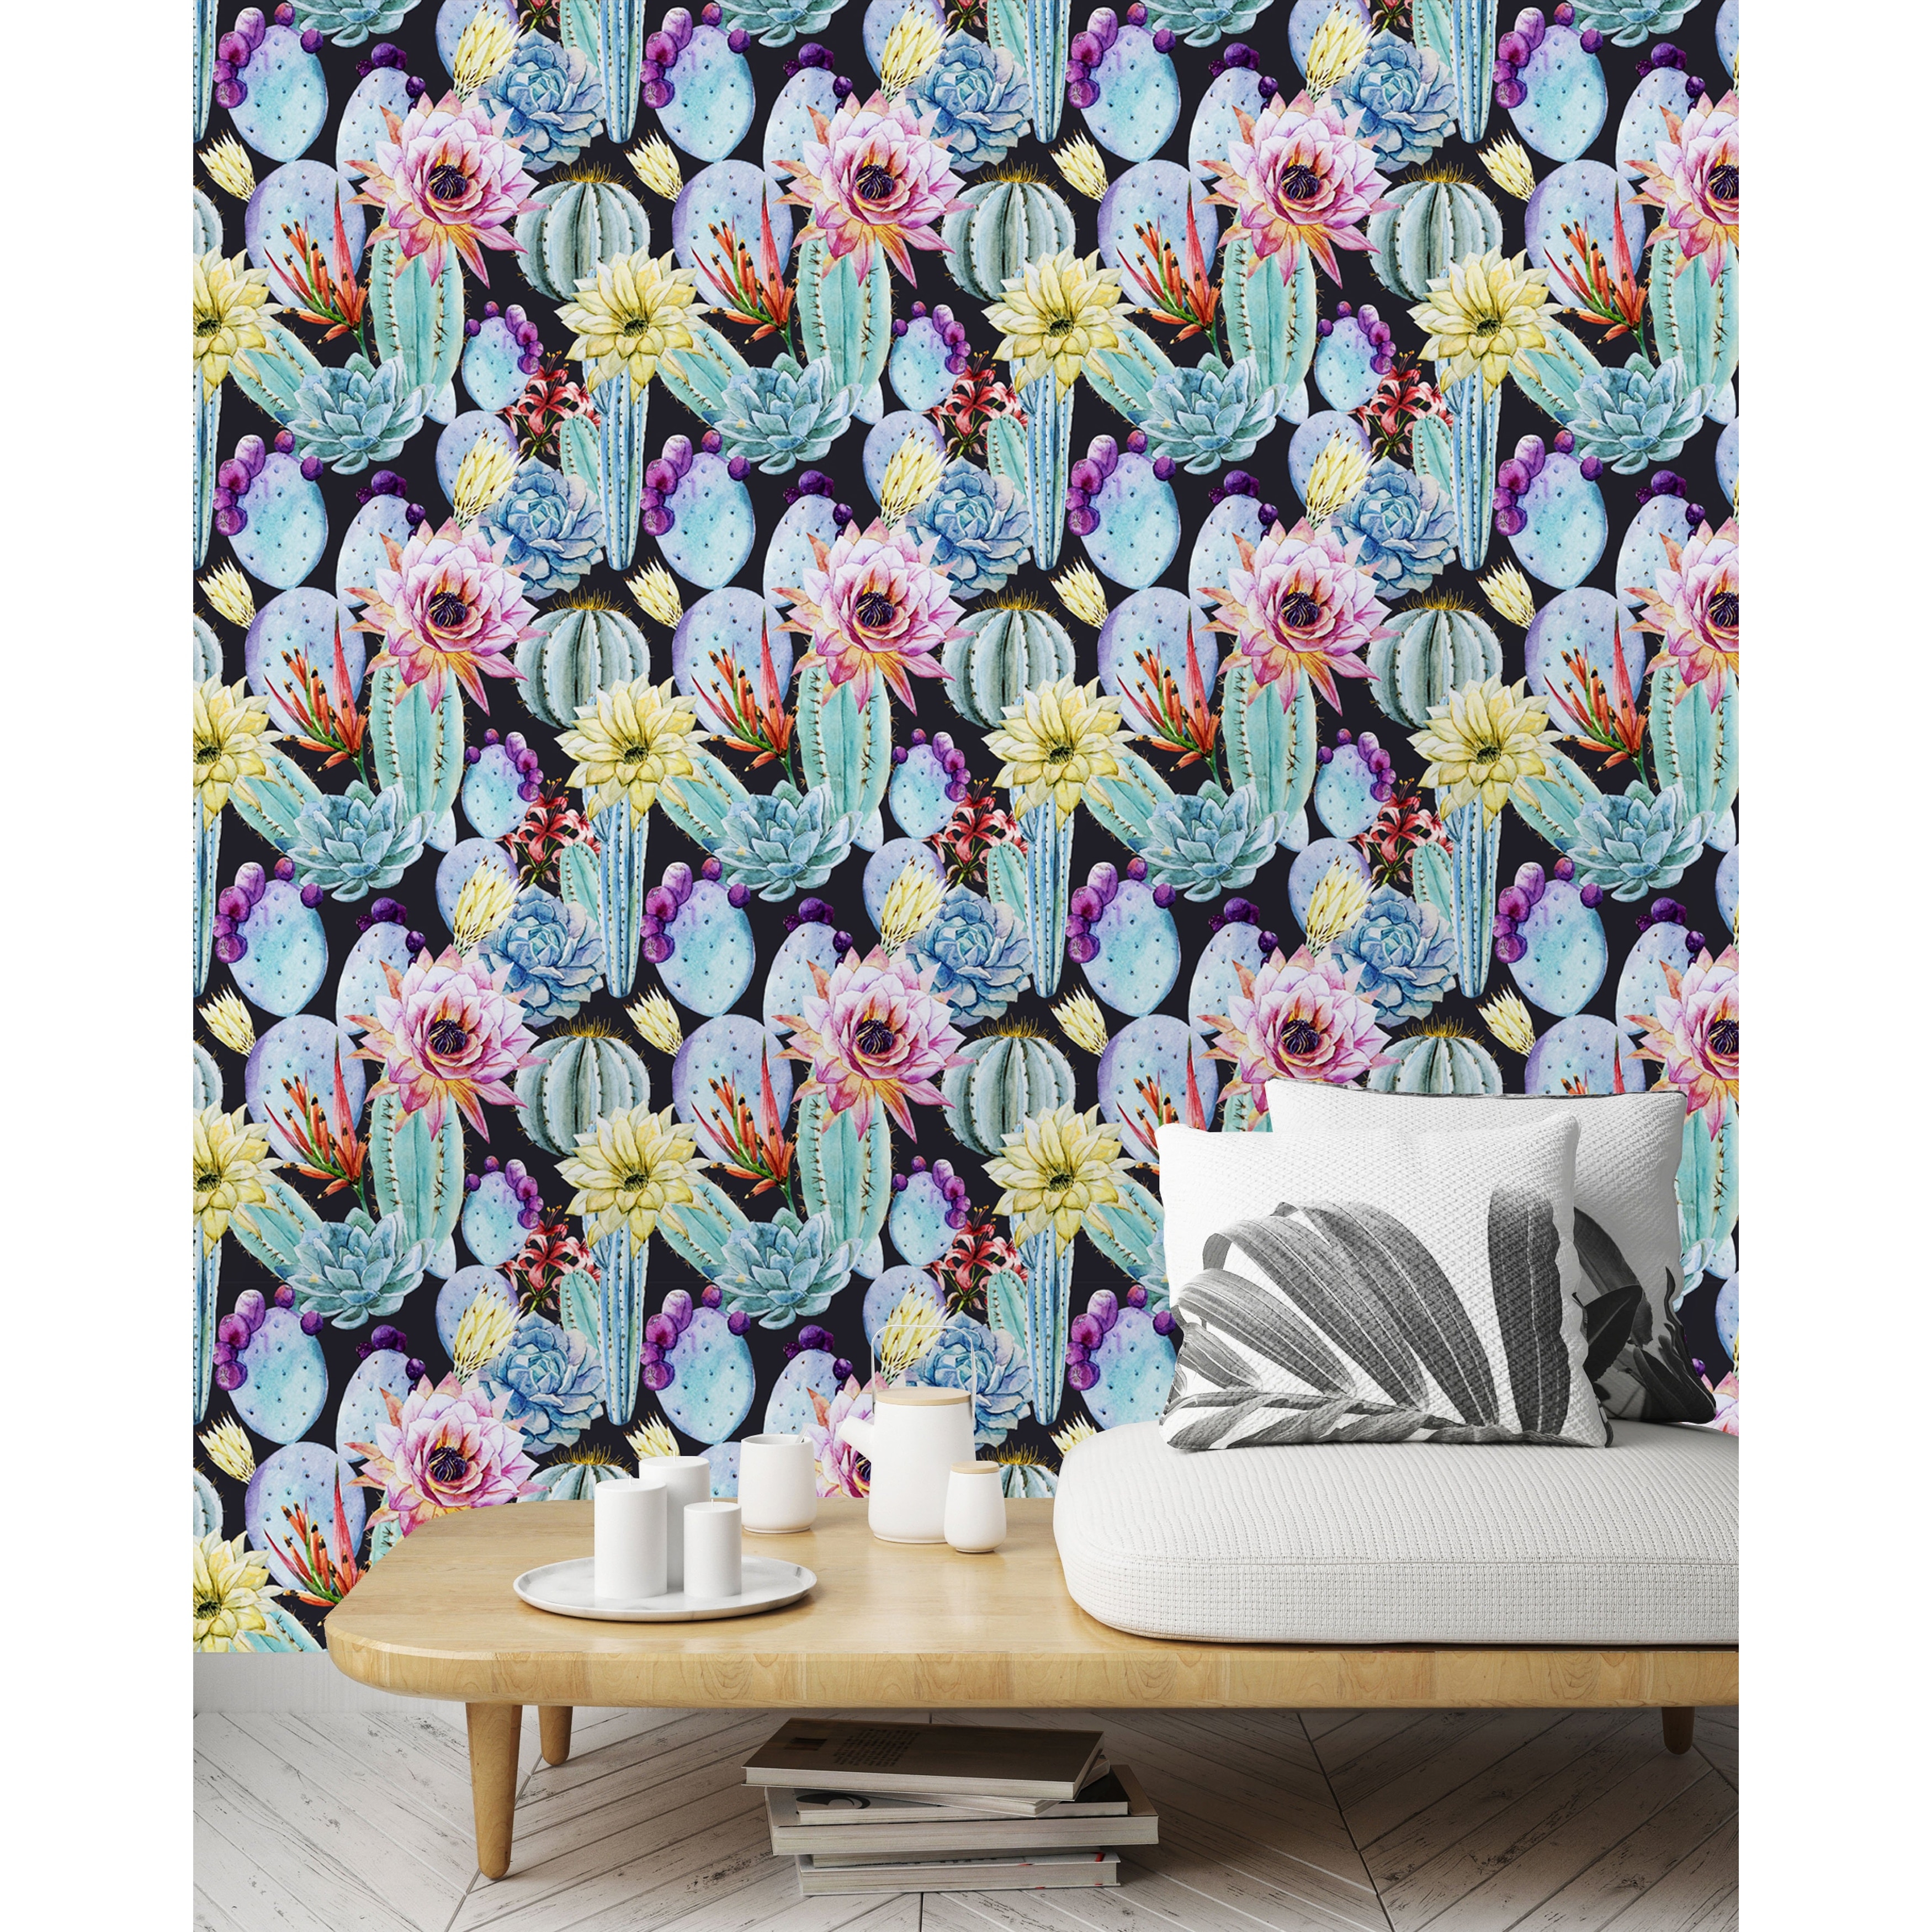 RoomMates Prickly Pear Peel and Stick Wallpaper Covers 2818 sq ft  RMK11352WP  The Home Depot